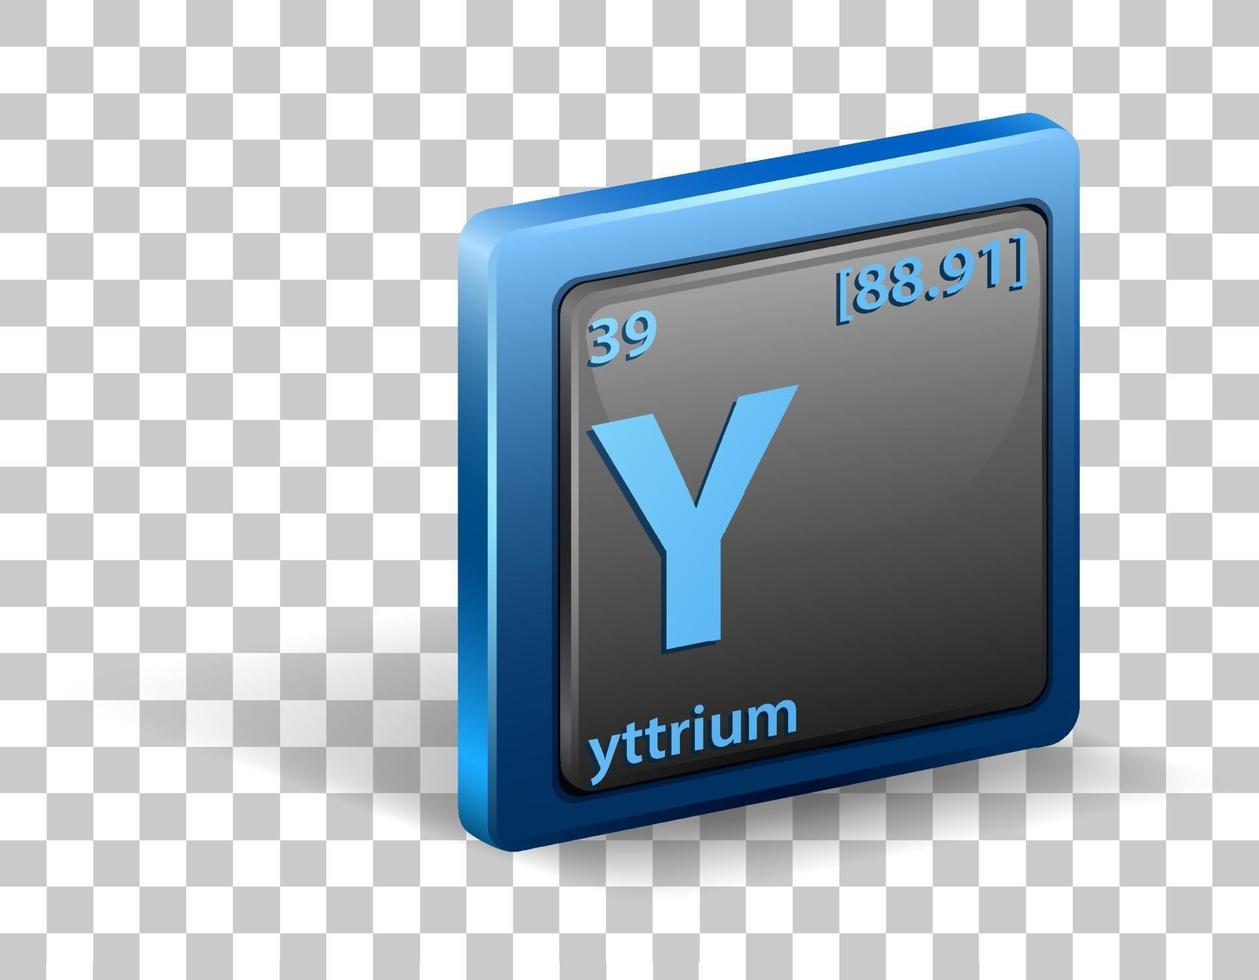 Yttrium chemical element. Chemical symbol with atomic number and atomic mass. vector